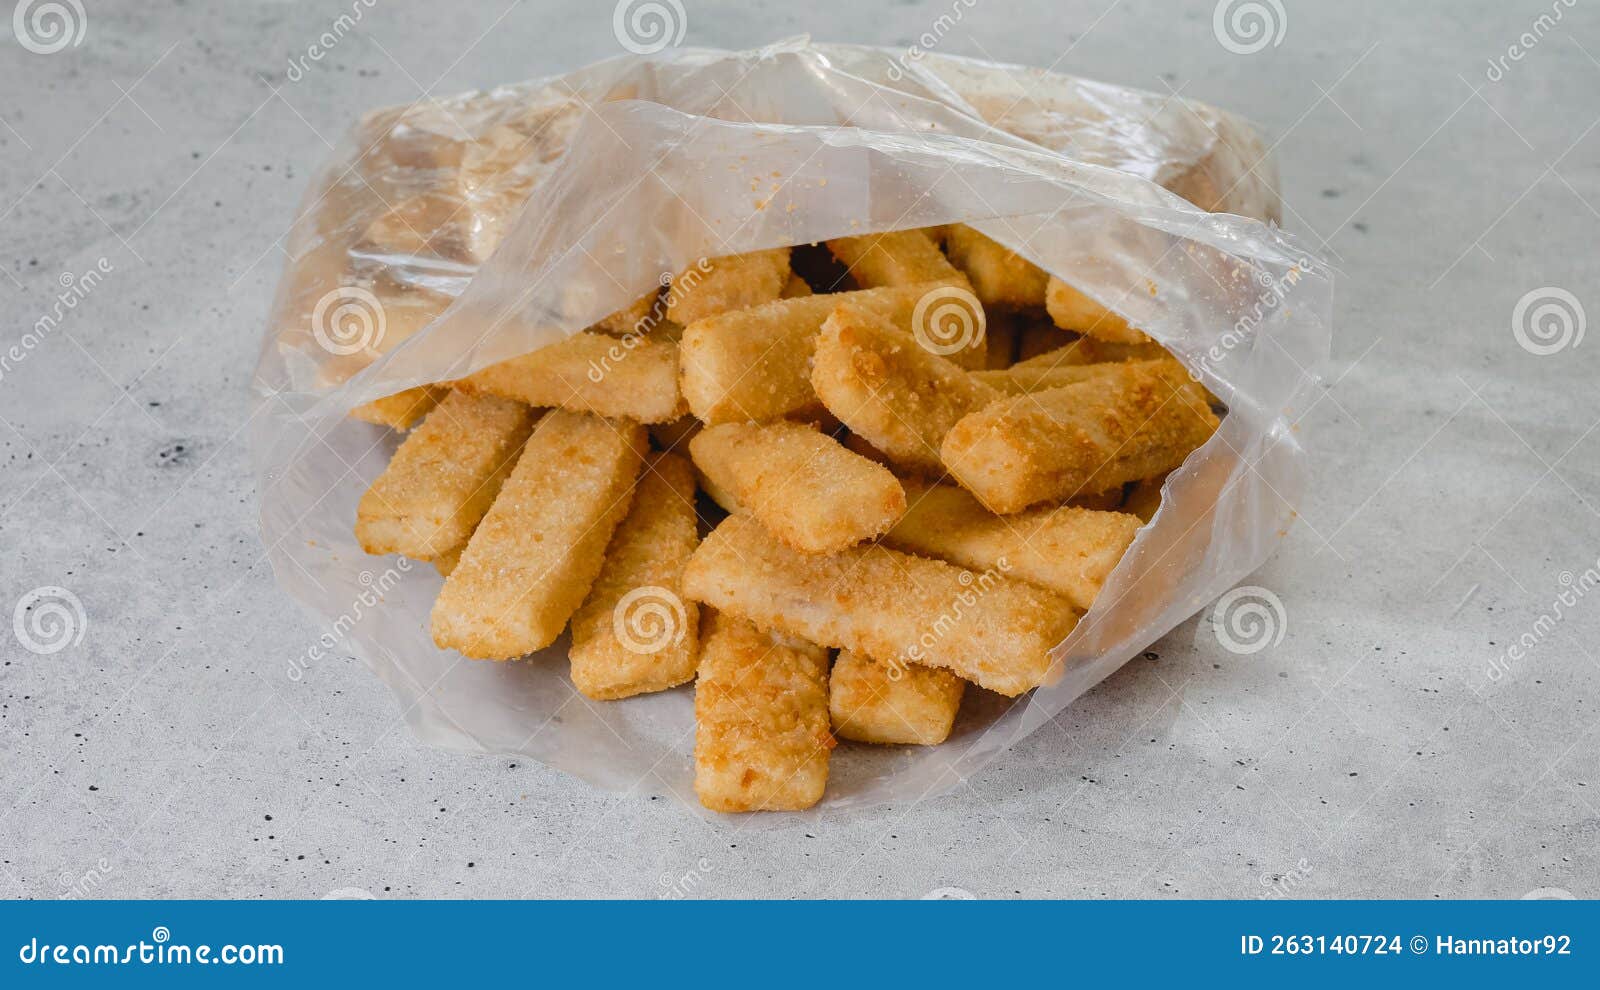 Frozen French Fries Plastic Bag Clipping Path Stock Photo by ©lydiavero  448083412